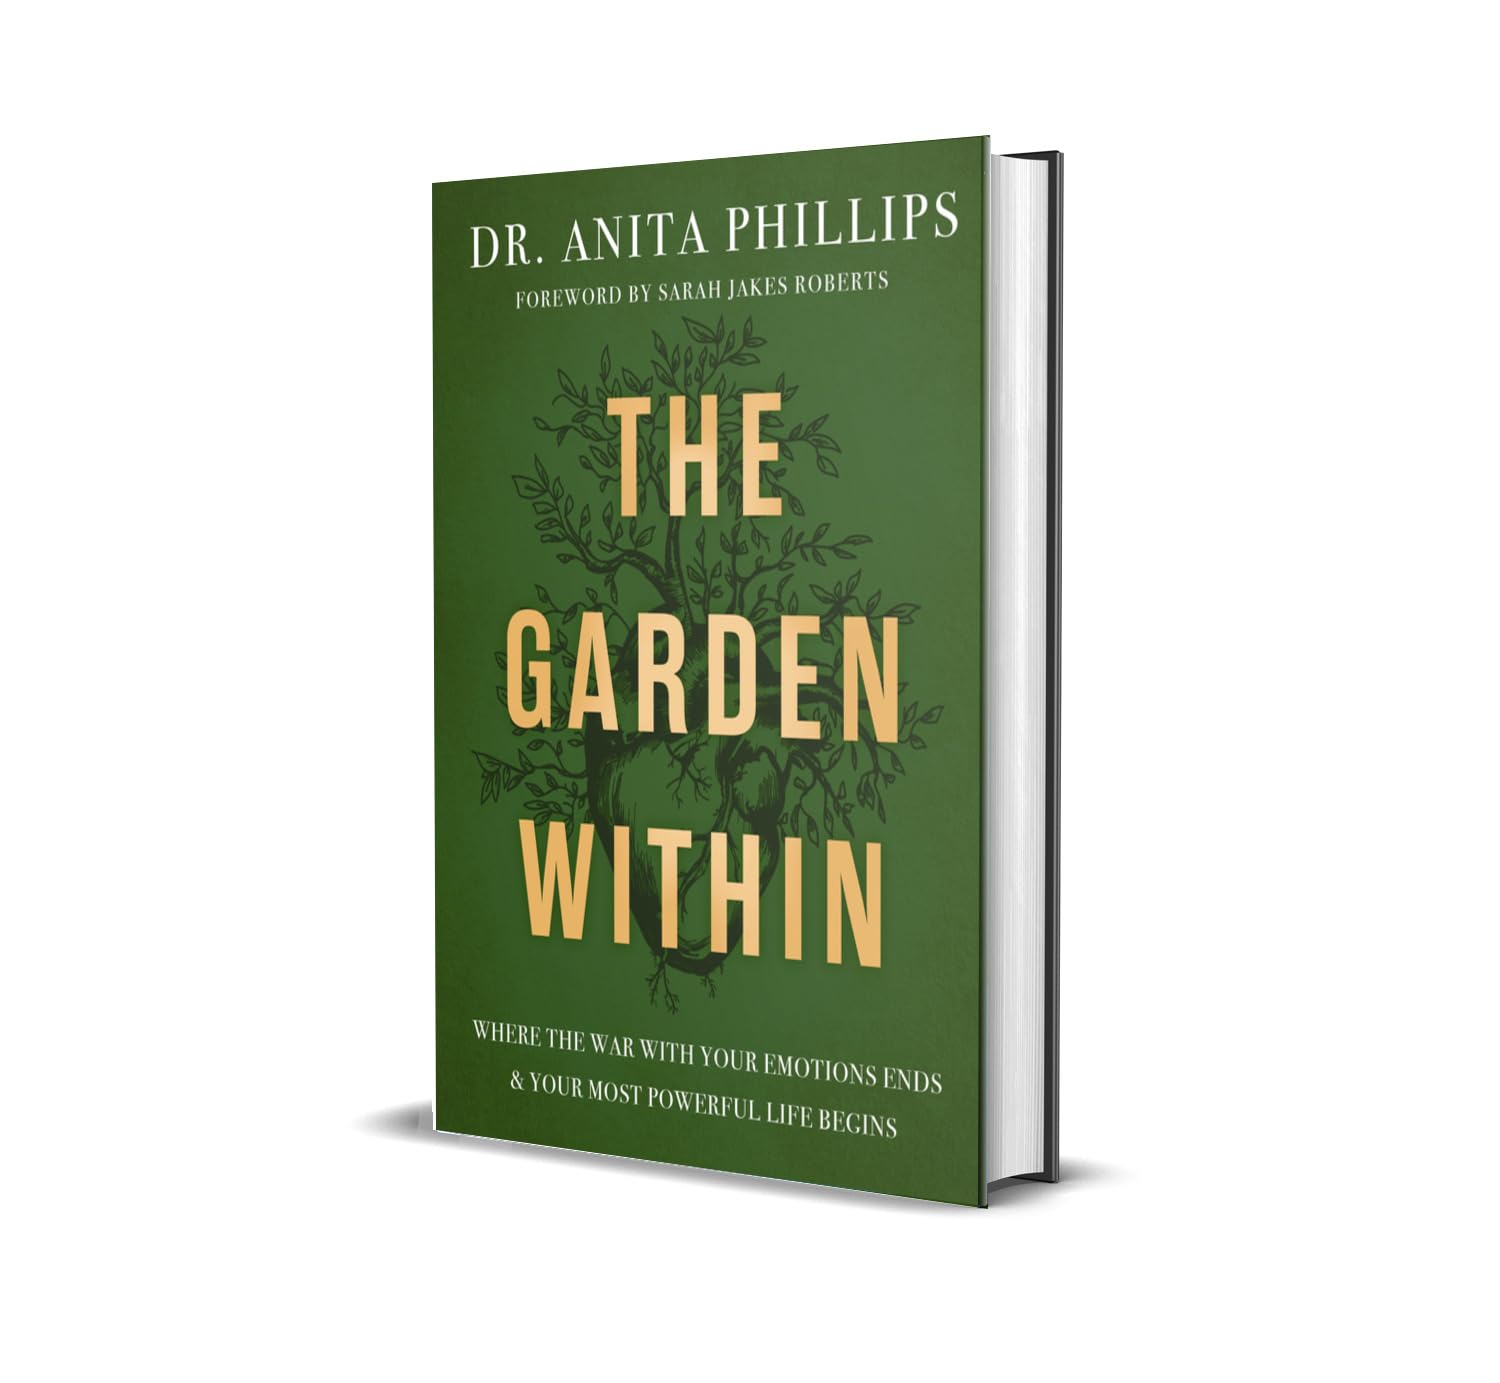 The Garden Within: Where the War with Your Emotions Ends and Your Most Powerful Life Begins